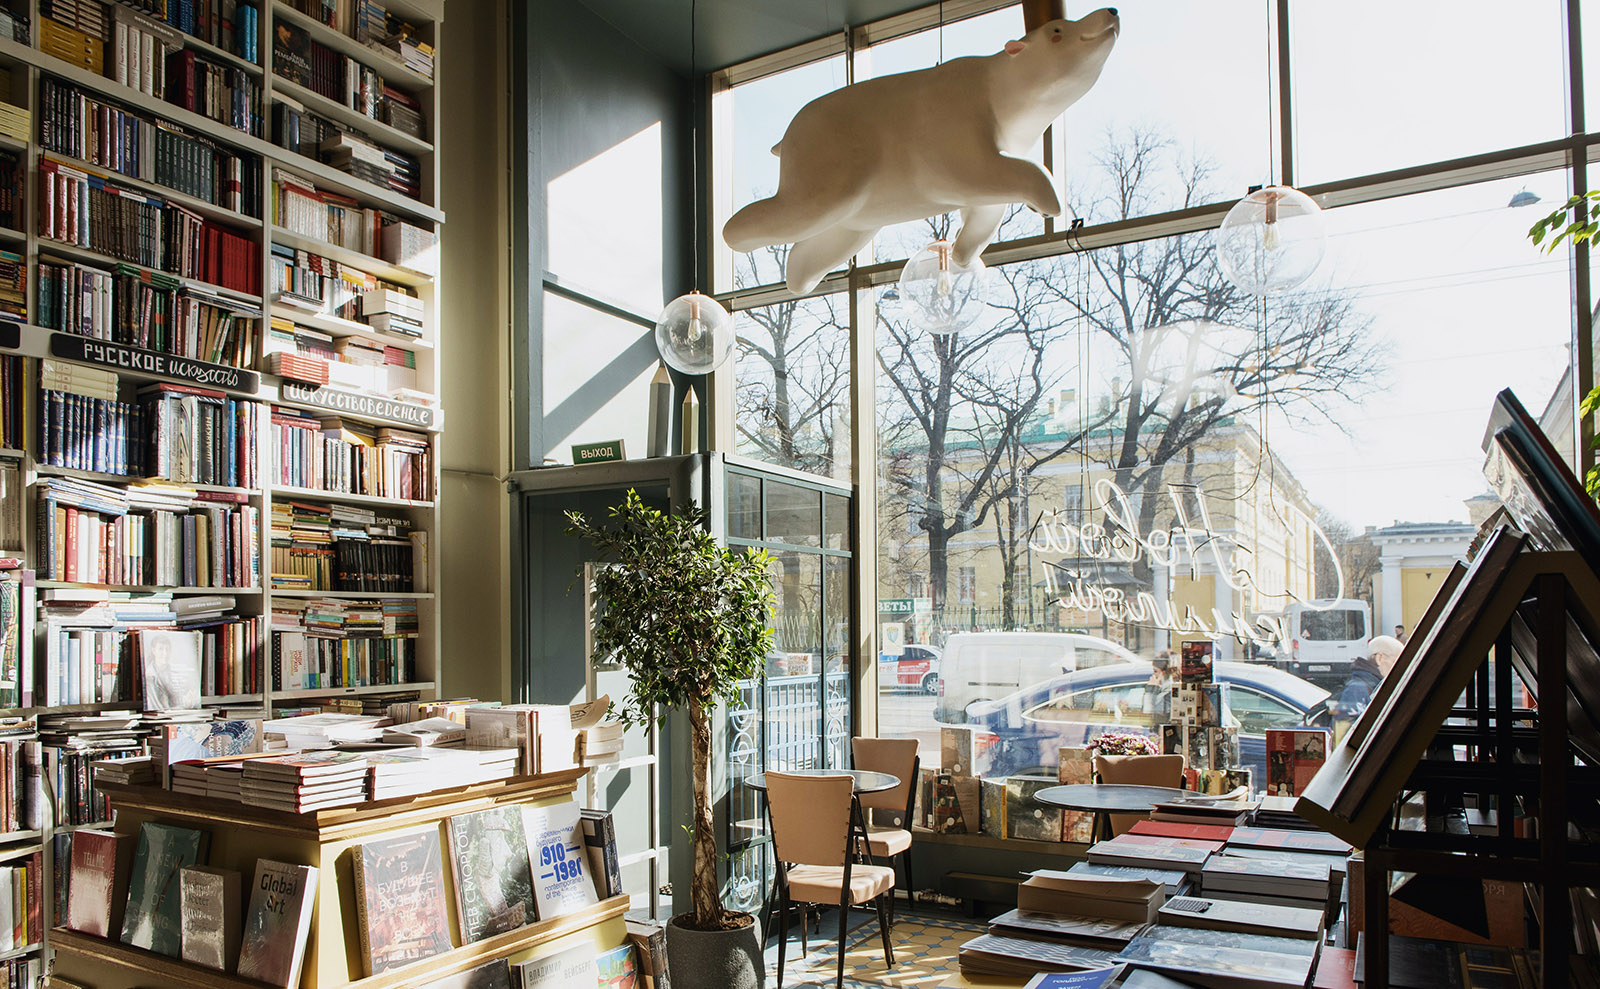 7 Great Novels Set in Bookshops To Inspire a Book Shopping Spree